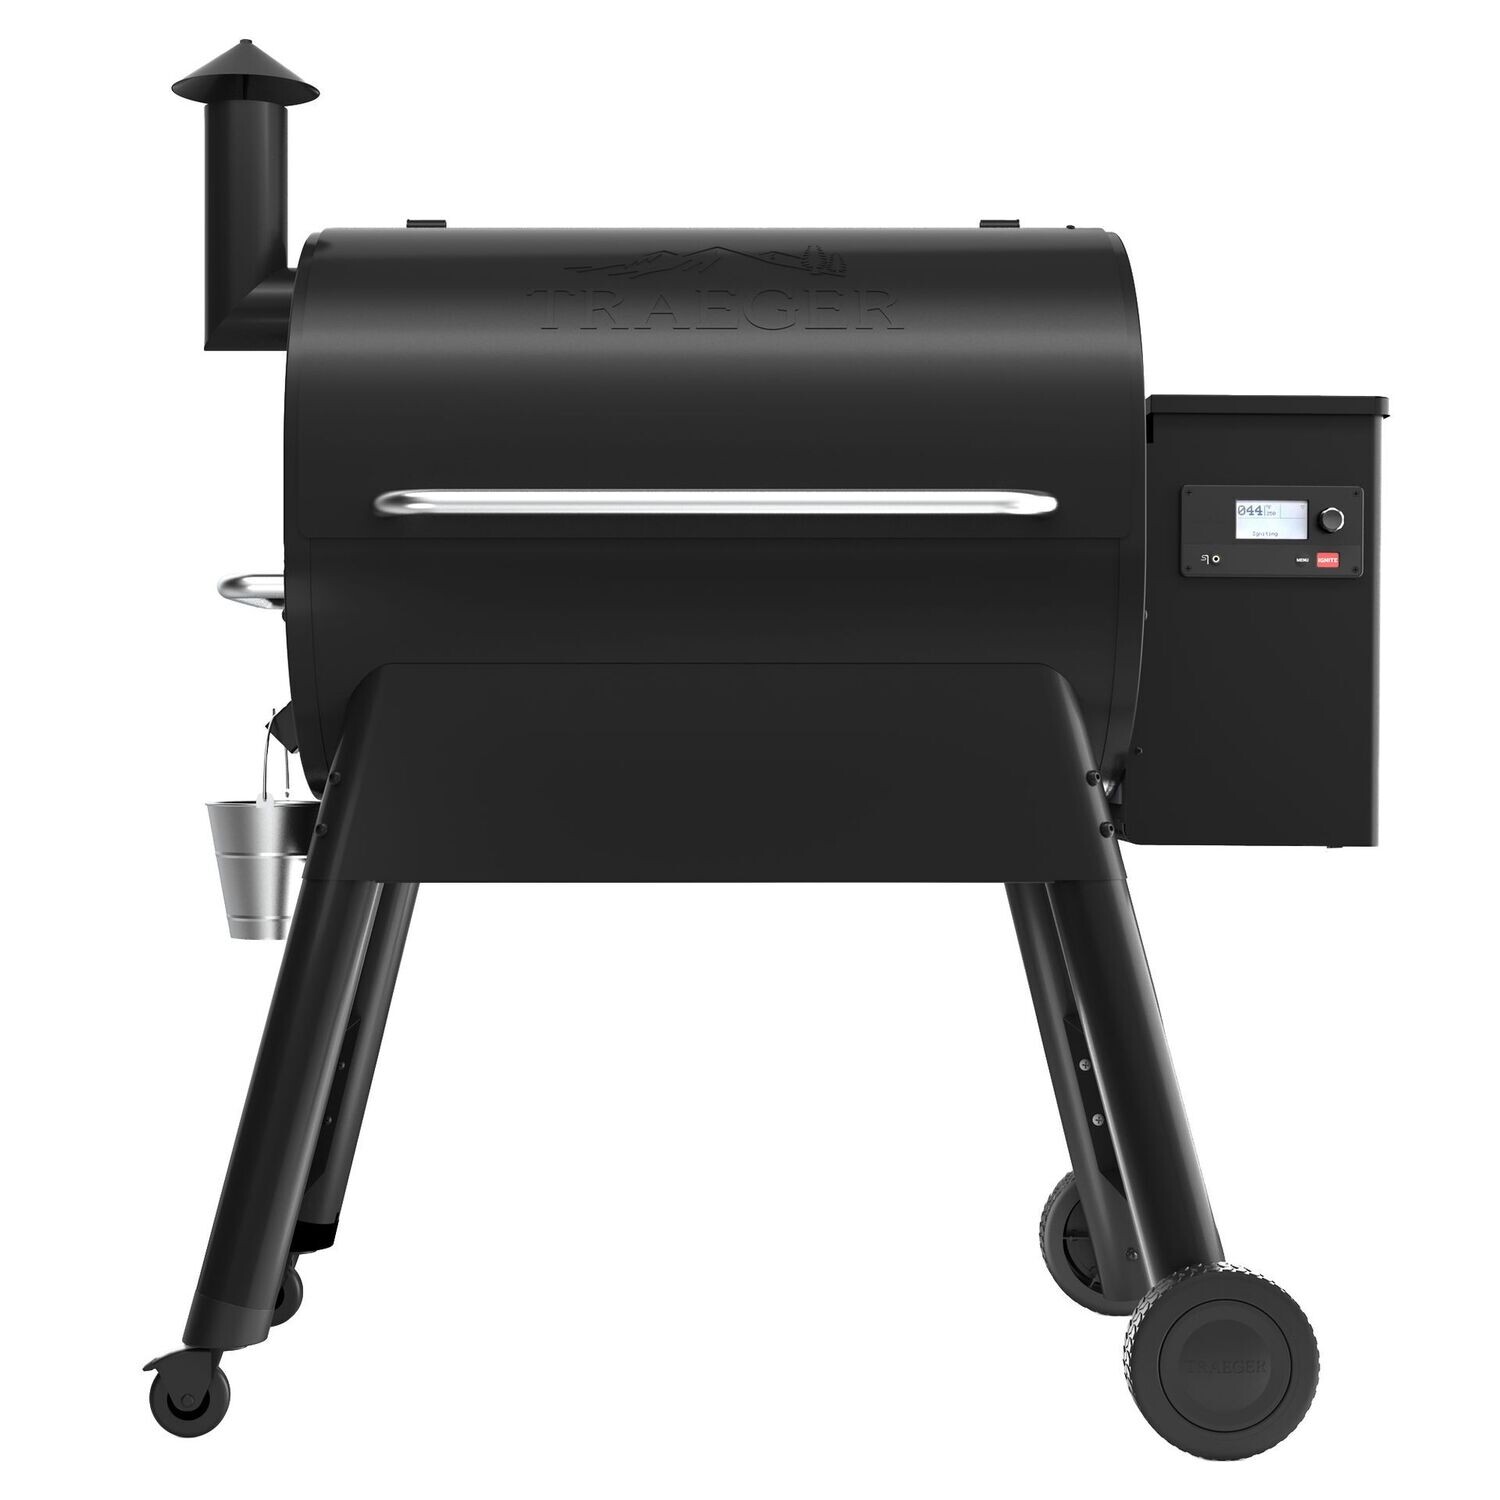 TRAEGER PRO 780 PELLET GRILL (Includes Cover & 2 bags of Pellets) RRP £1329.96 PROMO £999.99